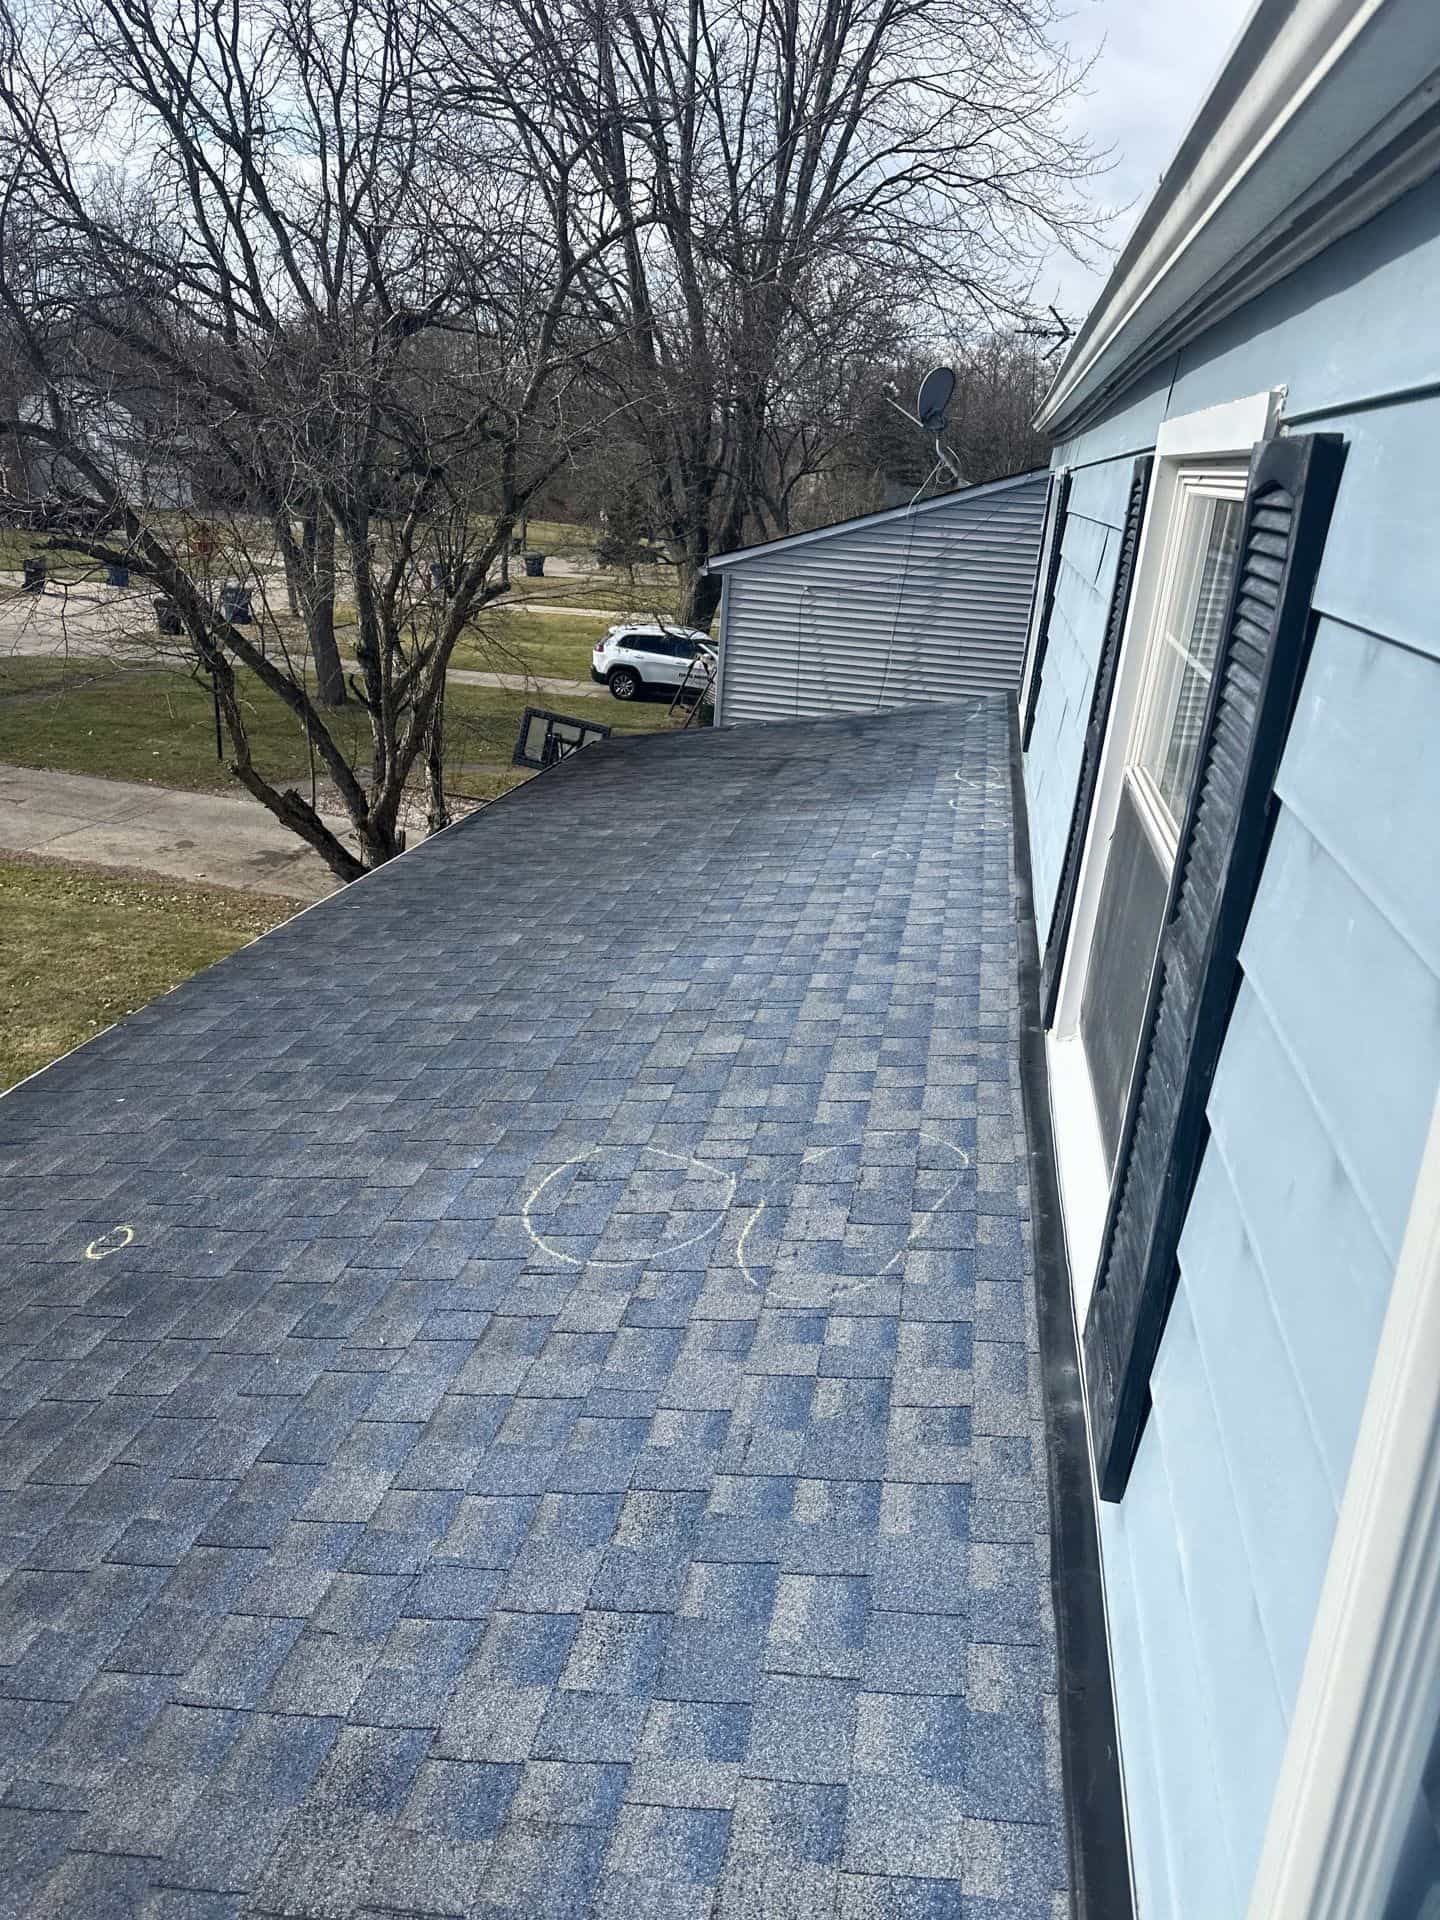 View of a rooftop with blue shingles, part of a light blue house, and bare trees in the background. A white car is parked on a street visible in the distance, showcasing our work's attention to detail and quality.